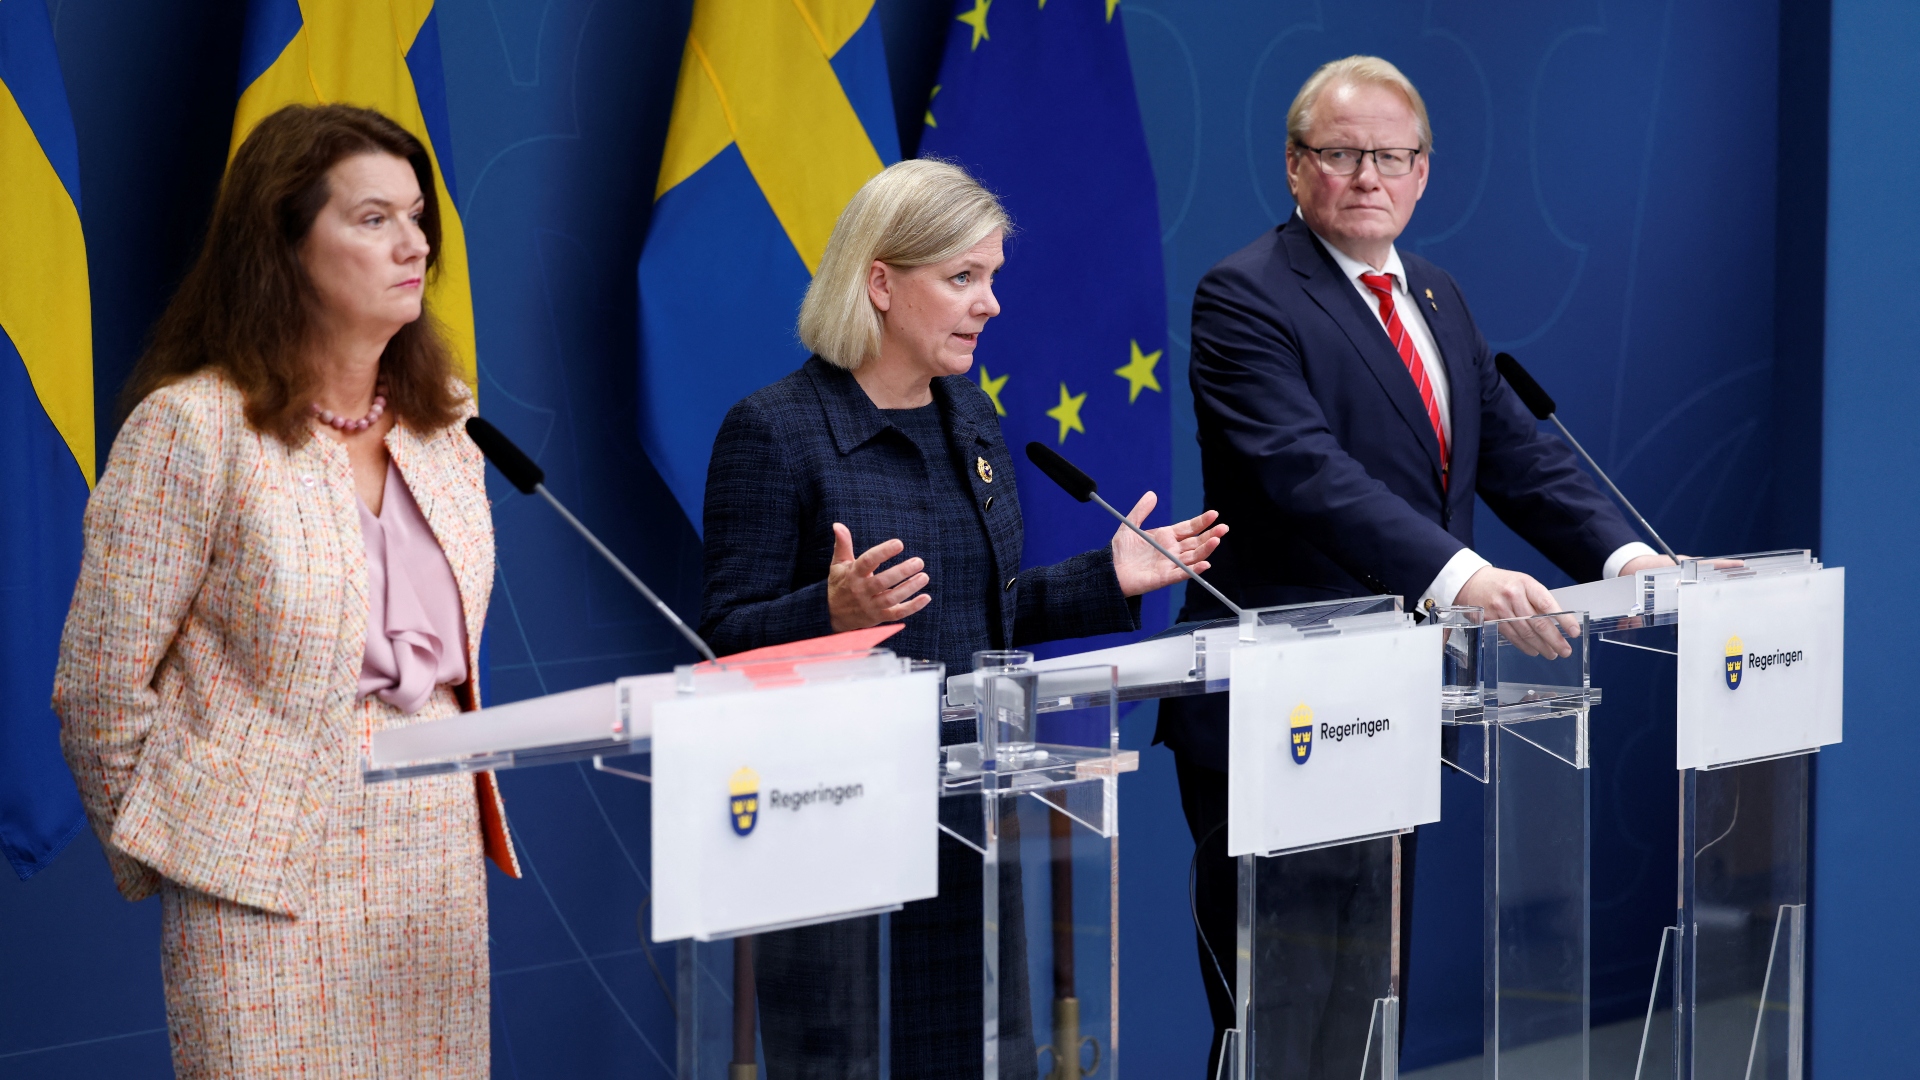 Sweden's Prime Minister Magdalena Andersson (center) held a news conference about the gas leak in the Baltic Sea from Nord Stream, in Stockholm. /TT News Agency/Reuters